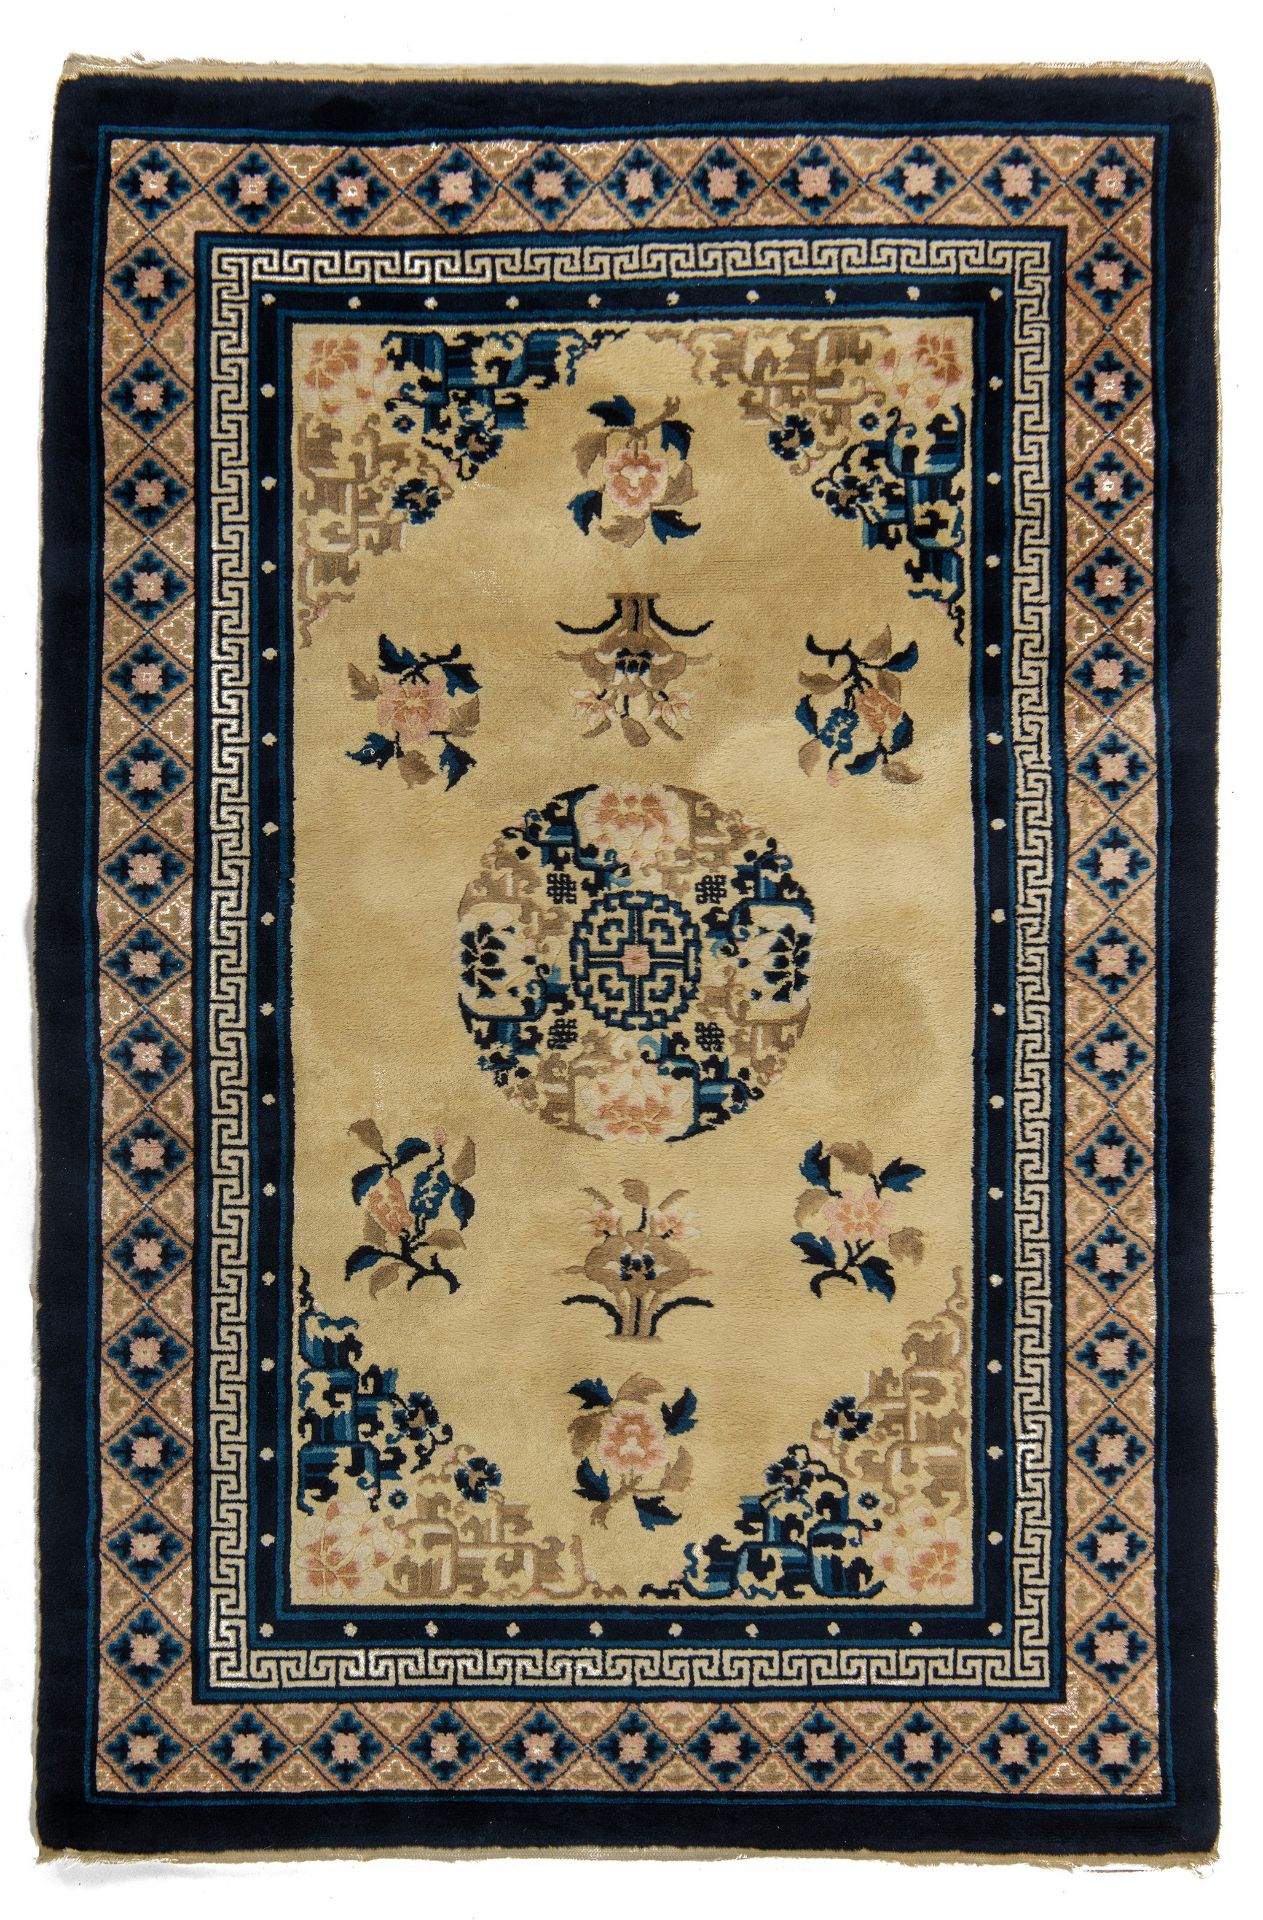 (BIDDING ONLY ON CARLOBONTE.BE) A Chinese woollen carpet, decorated with a central medaillon, 123,5